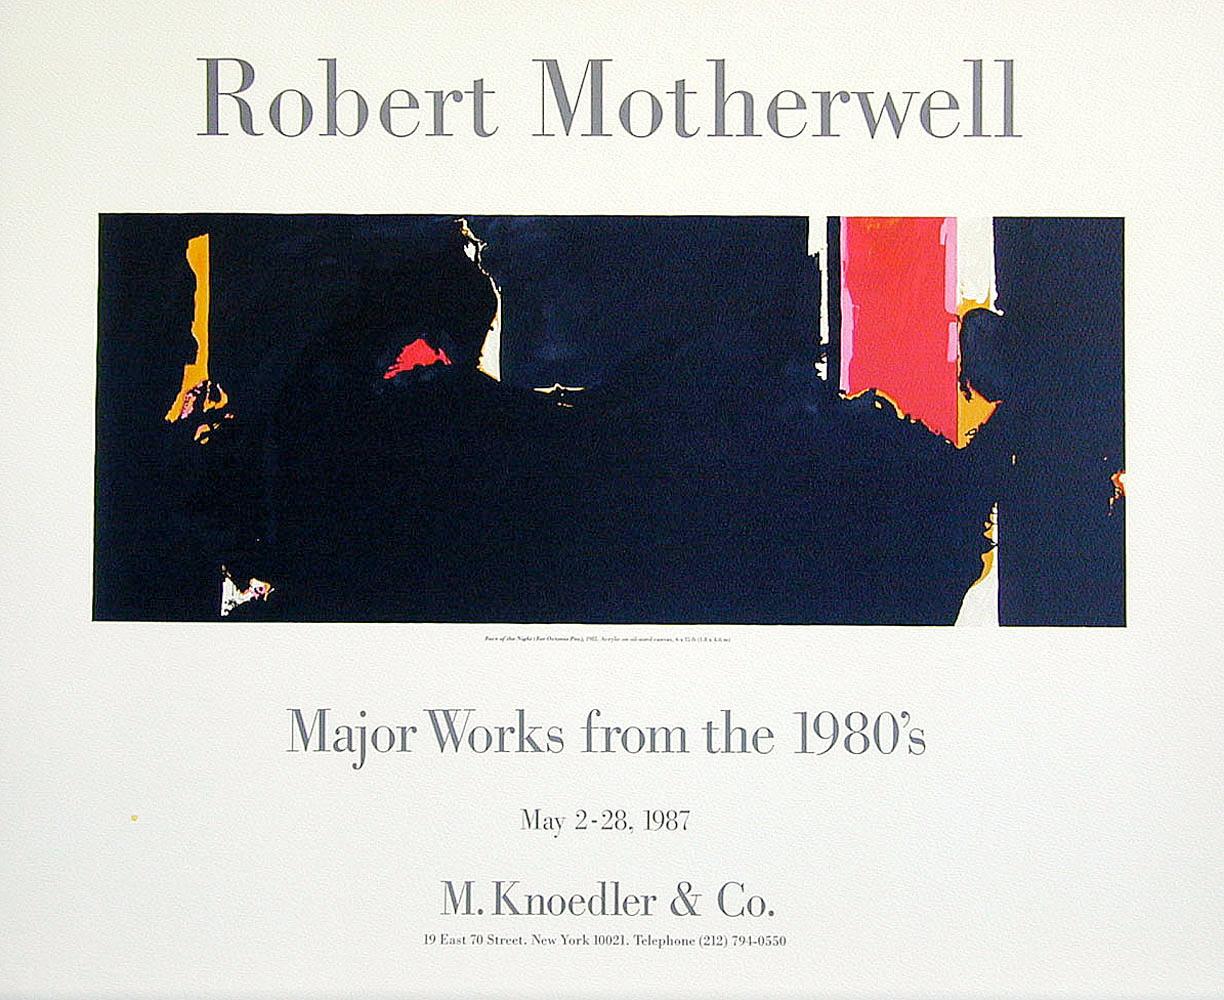 (after) Robert Motherwell Print - FACE OF THE NIGHT(Octavio Paz) Hand Lithography Poster, Abstract Expressionist